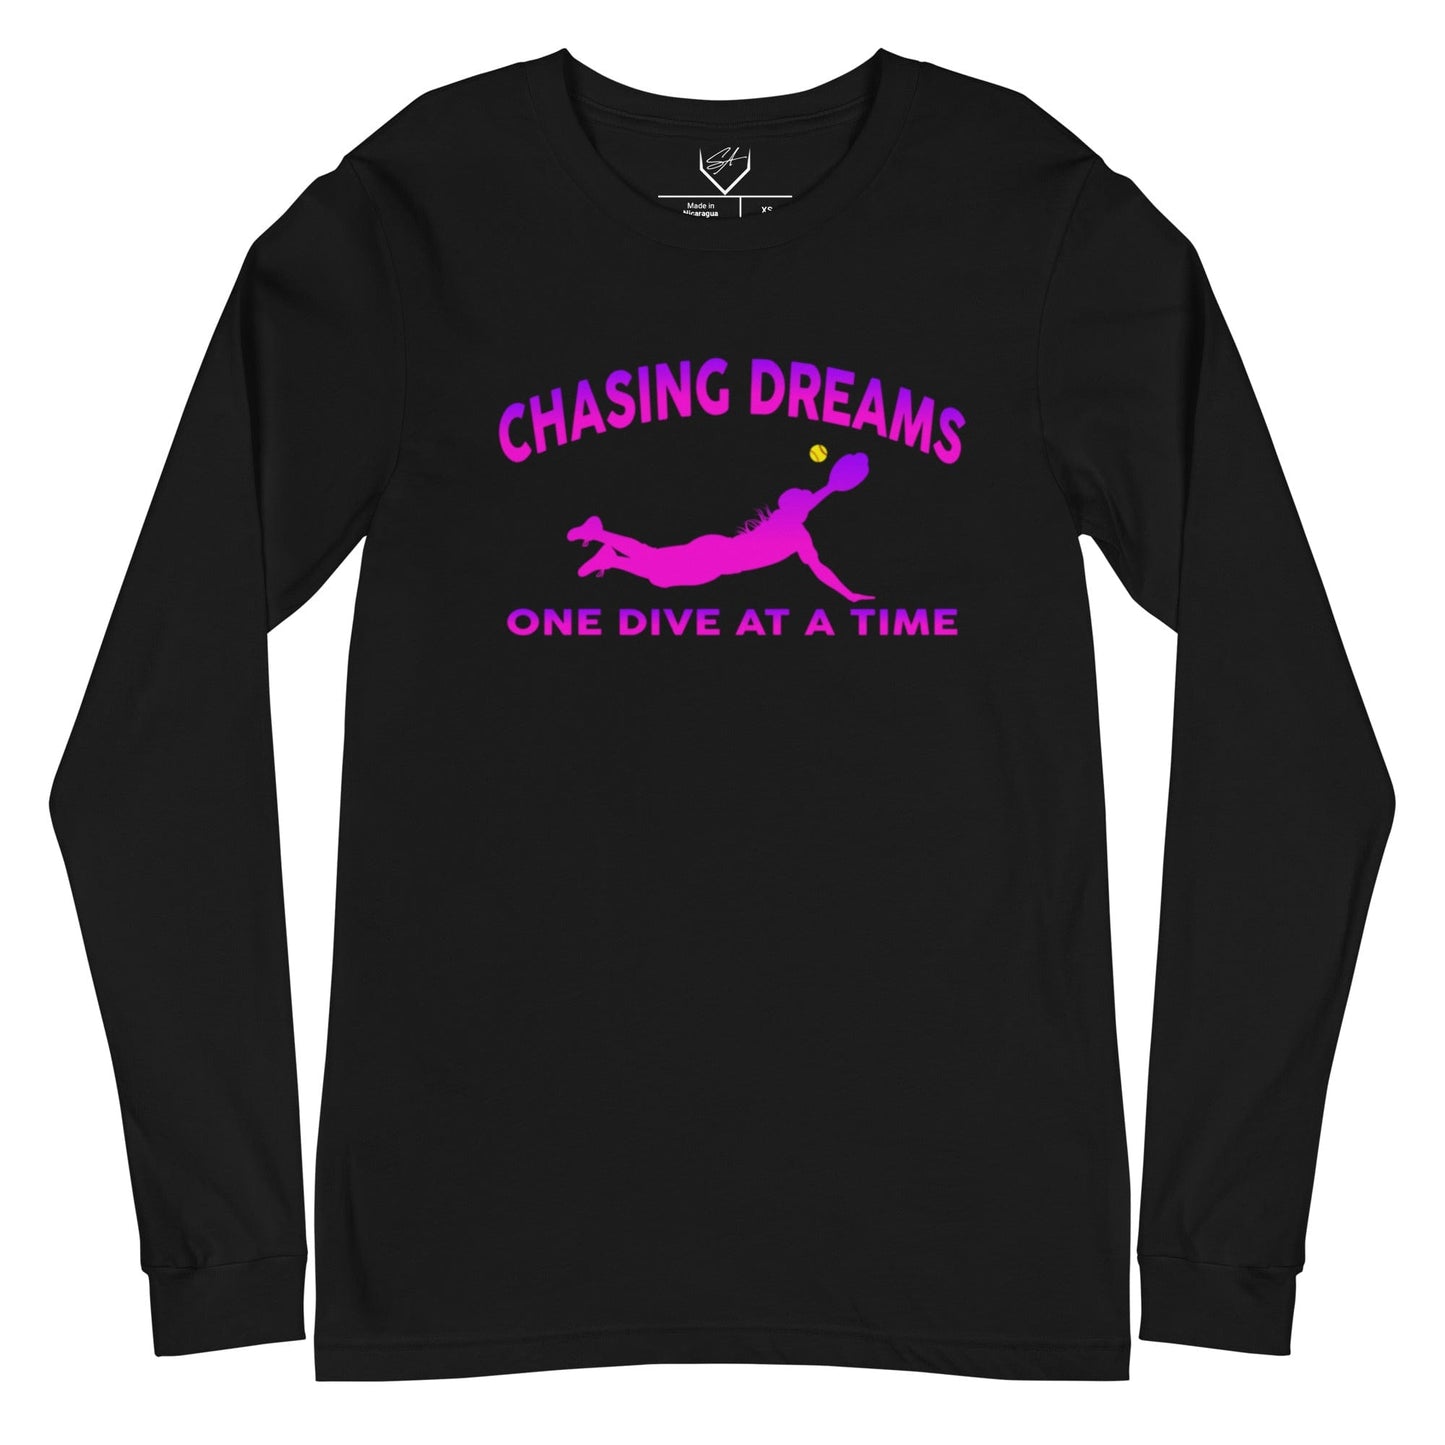 Chasing Dreams One Dive At A Time - Adult Long Sleeve